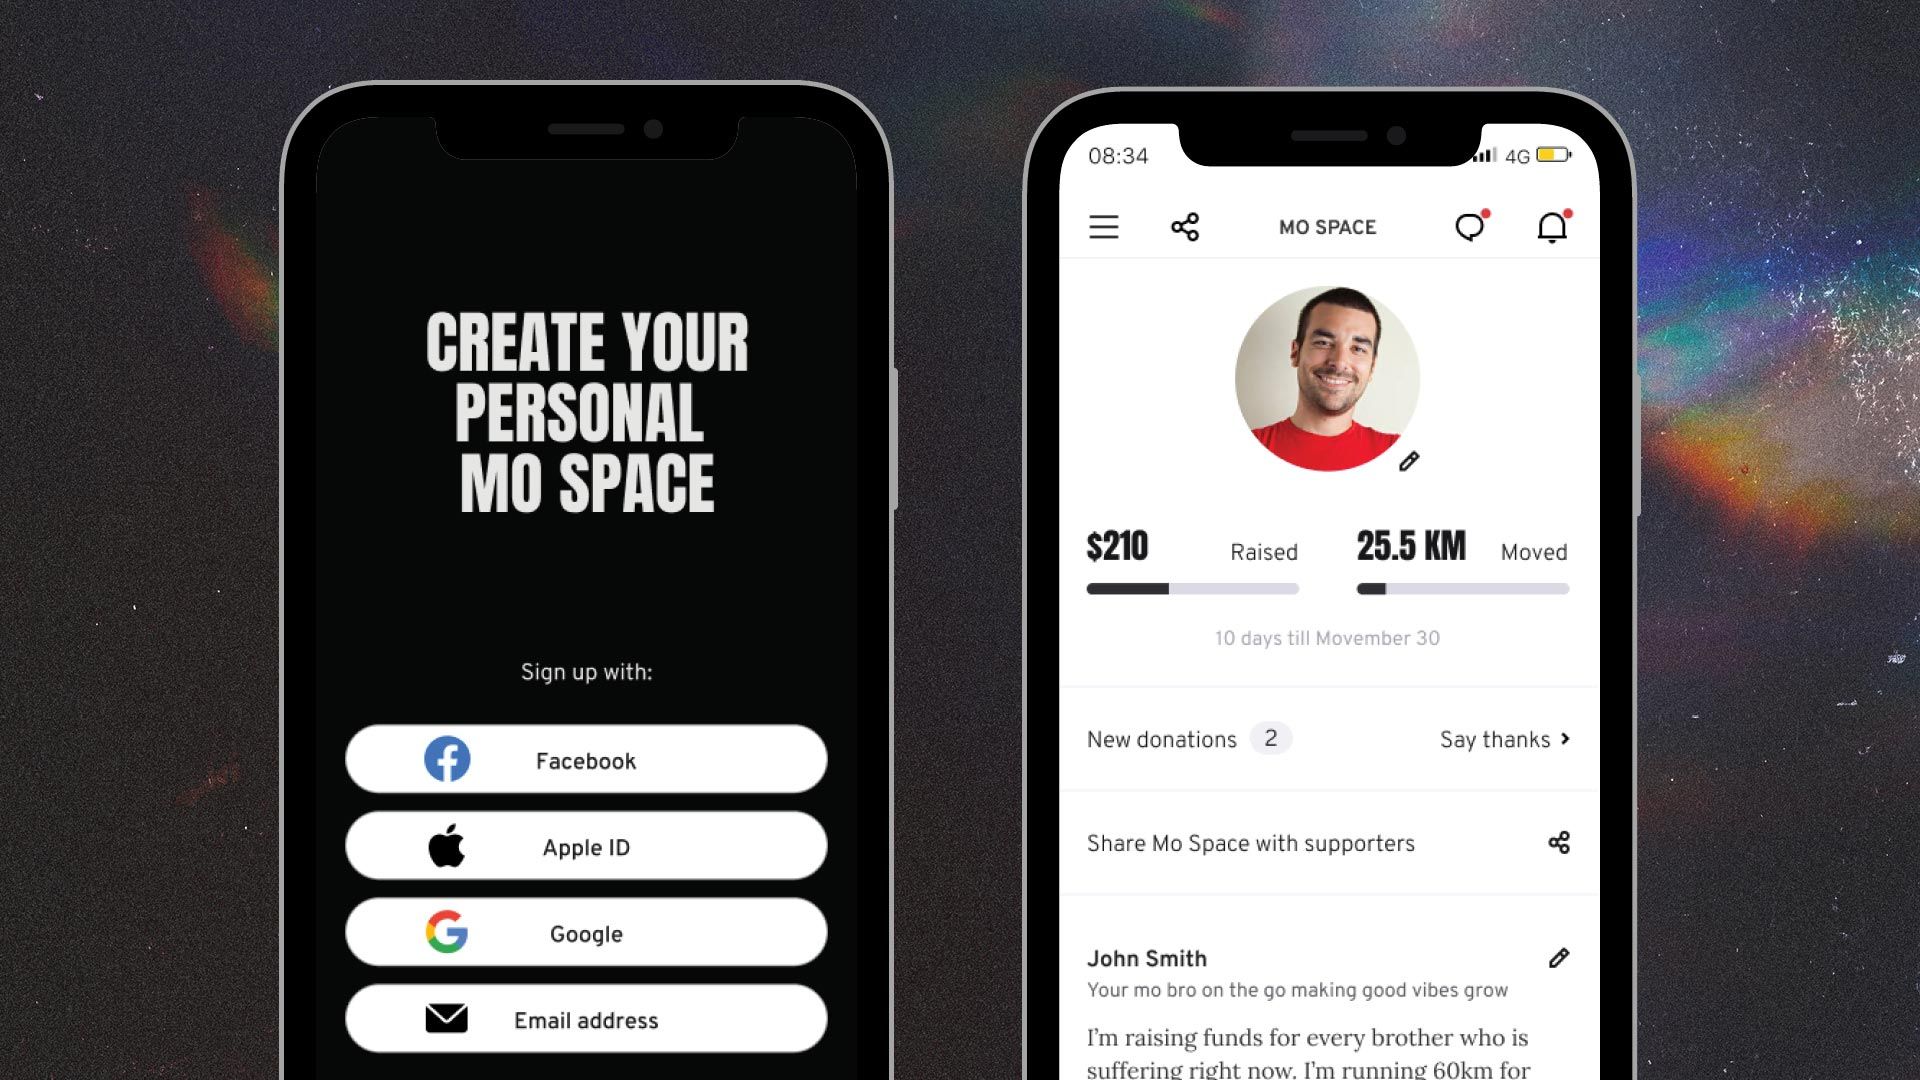 Images of two smartphones, showing two screens for the Movember app. These are the "Create Your Personal Mo Space" screen, and a view of a user's Mo Space.